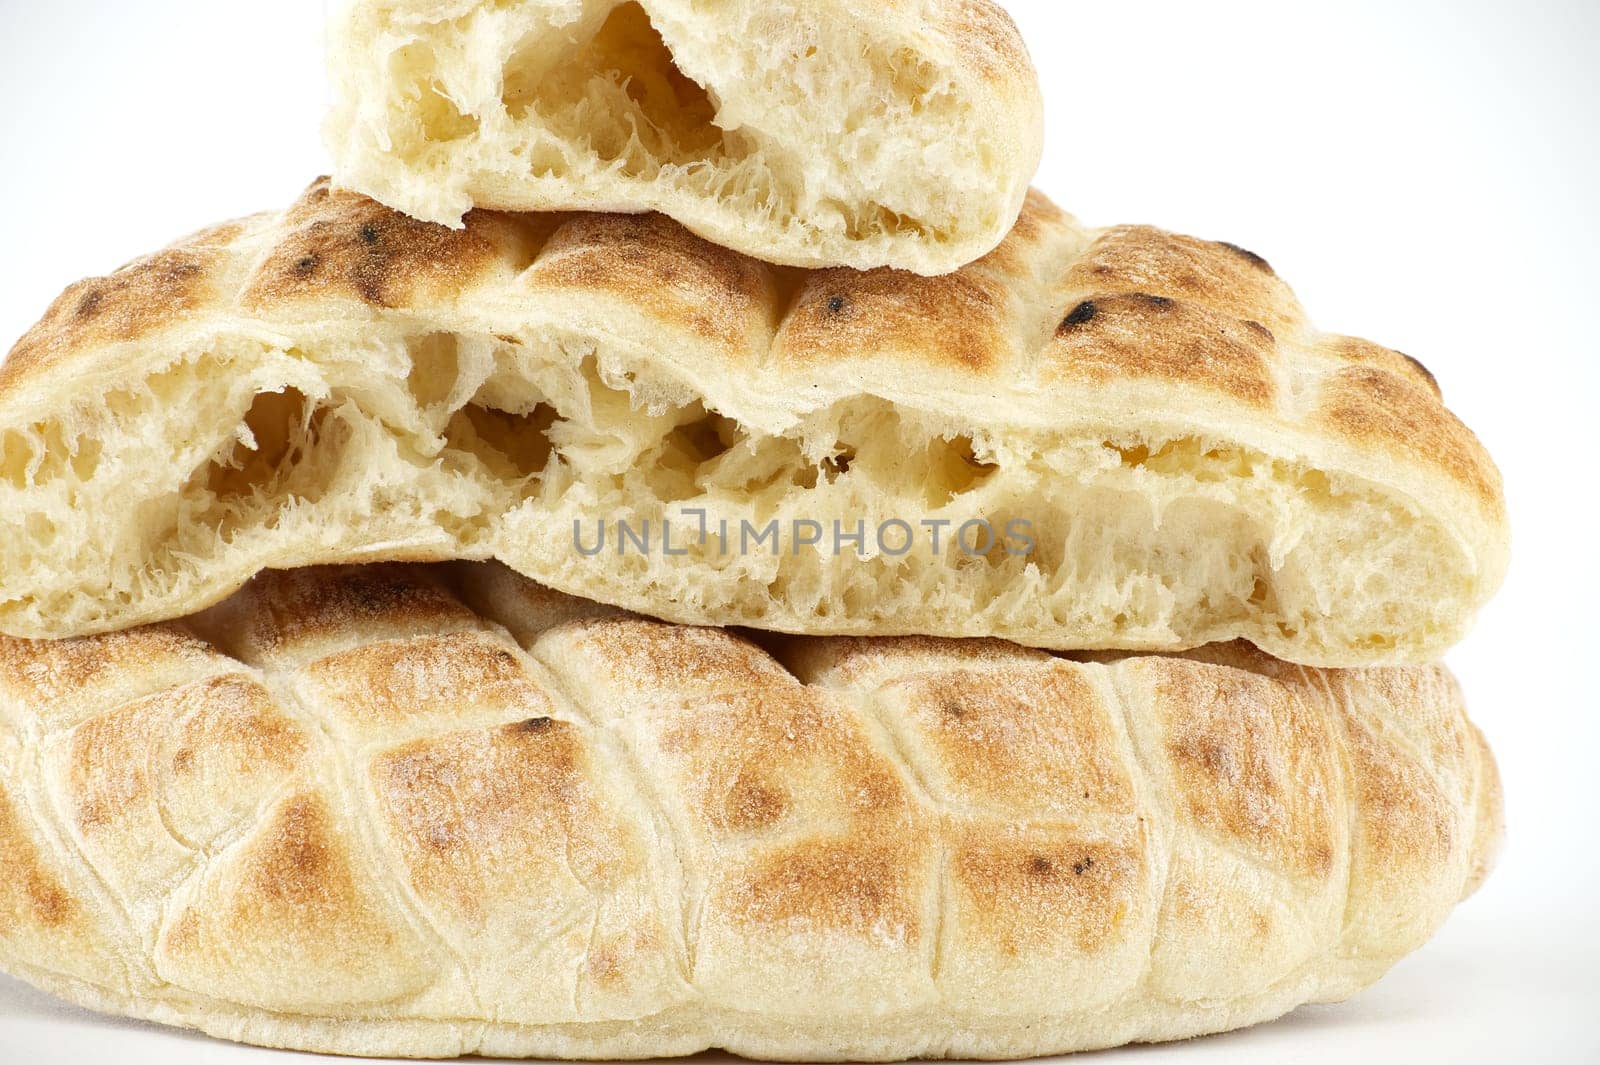 Pieces of pita flat-bread are stacked atop each other isolated on white background, typical fast food item, with the potential to be used as a snack